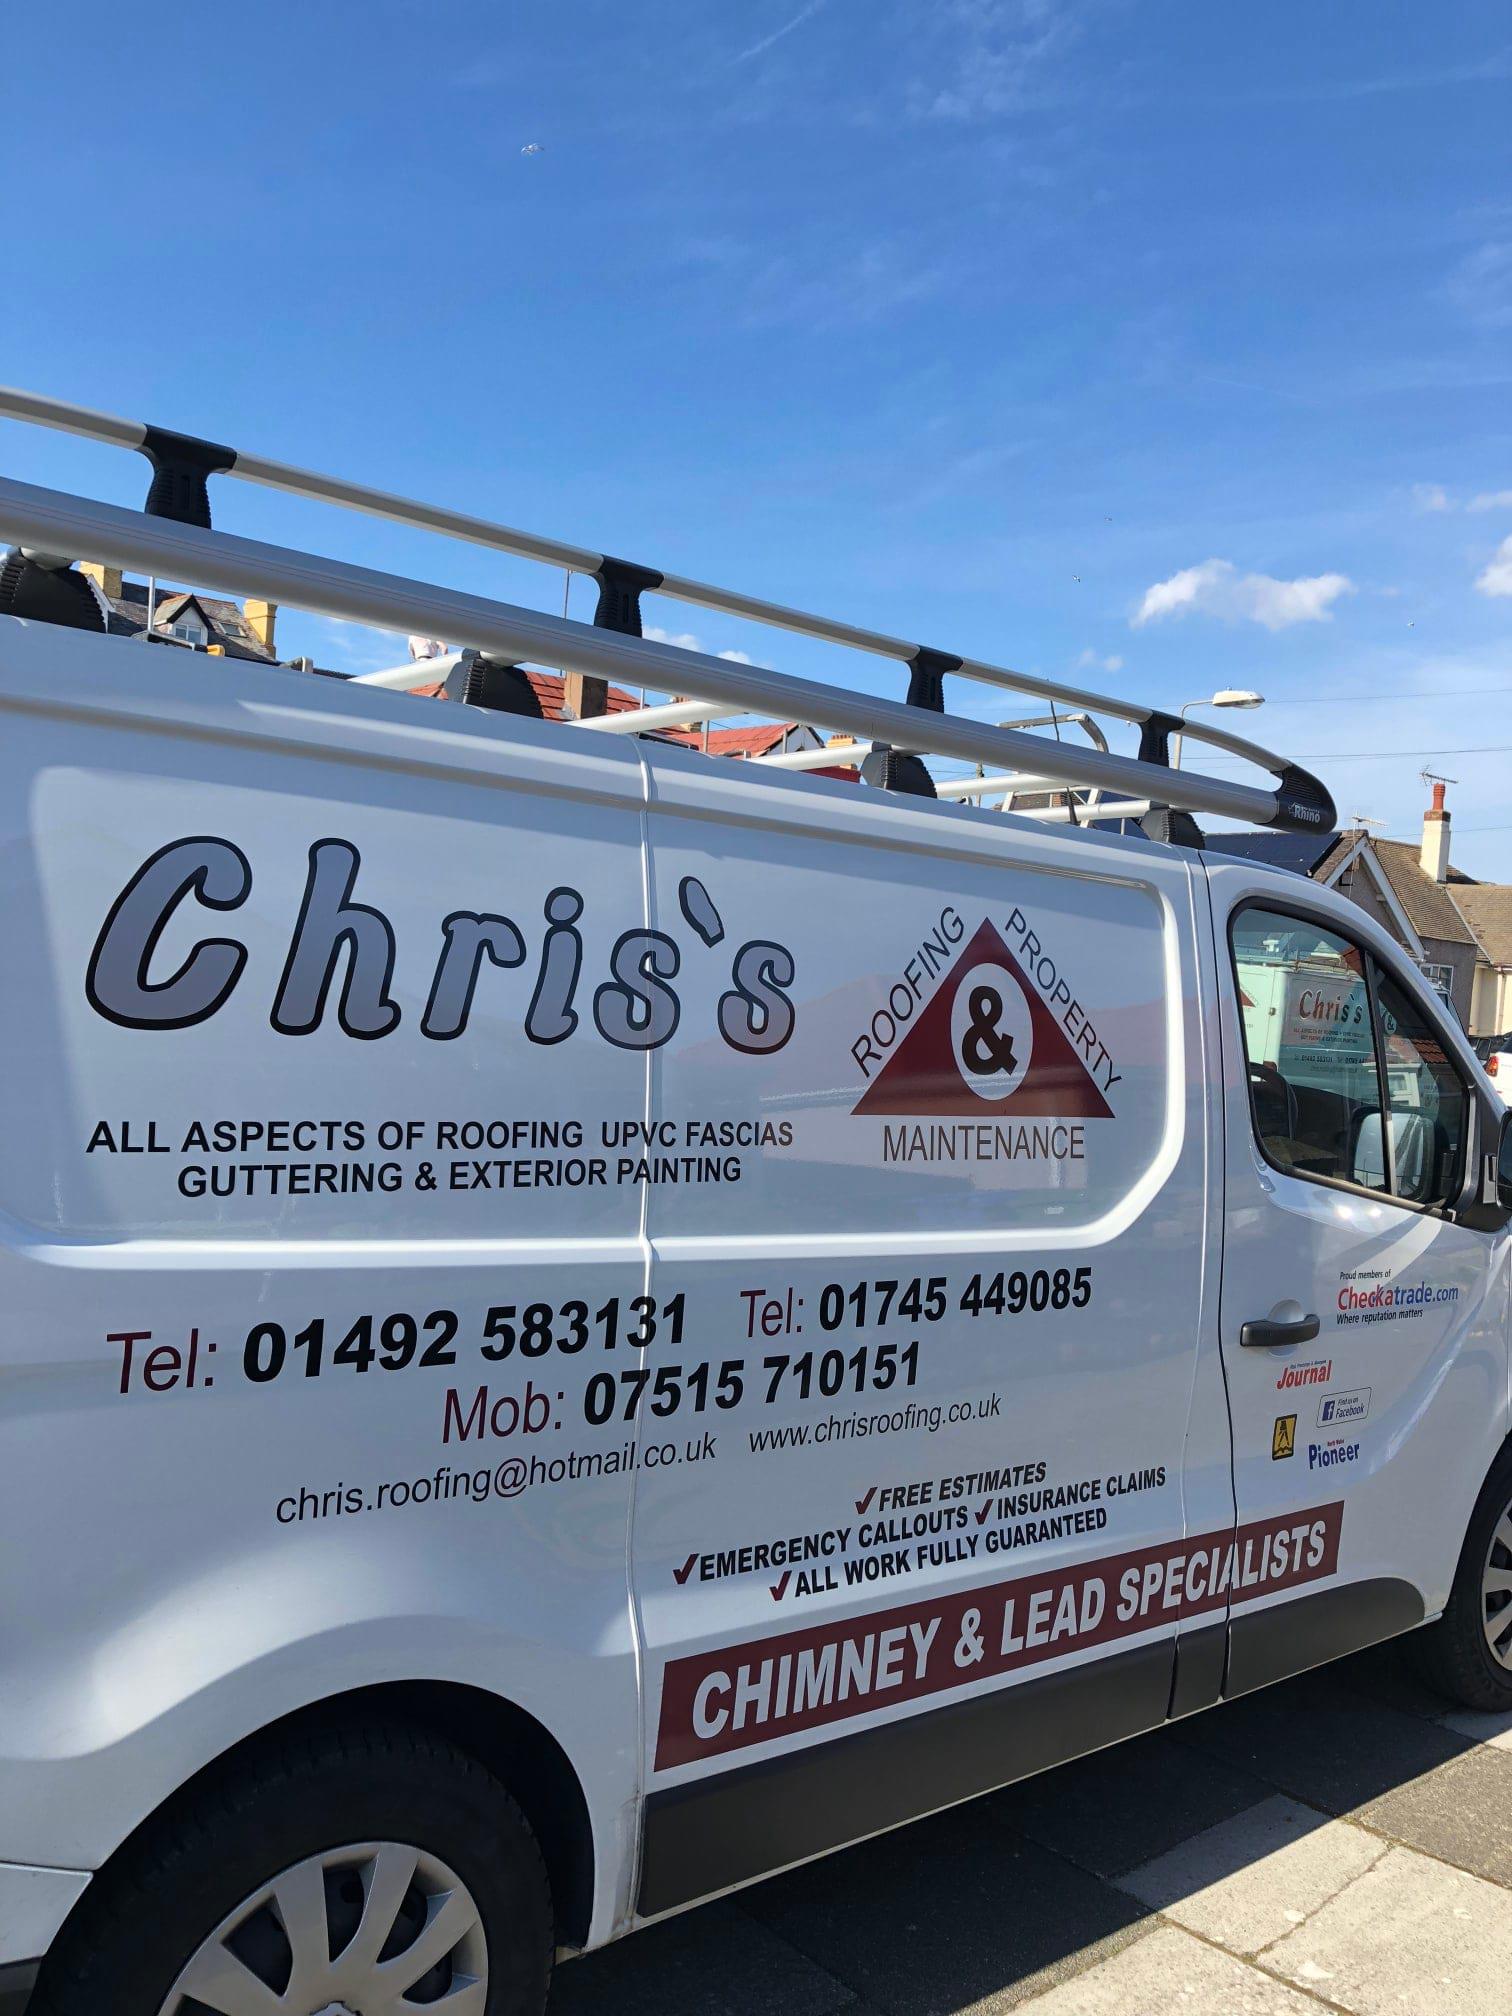 Images Chris's Roofing & Property Maintenance